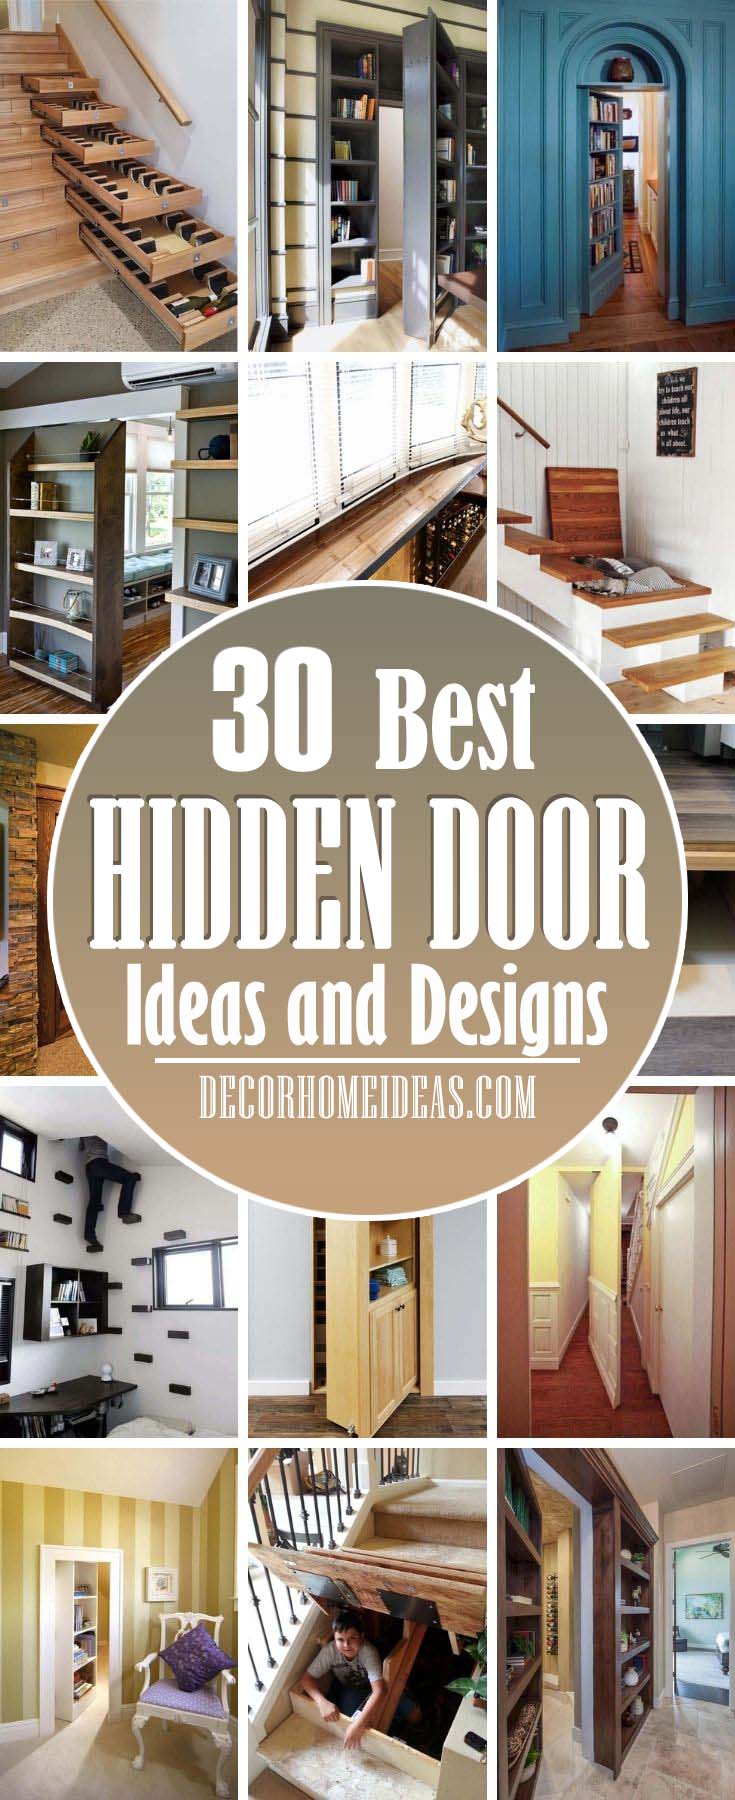 30 Clever Door Ideas That Are, How To Make A Secret Room In Your Basement